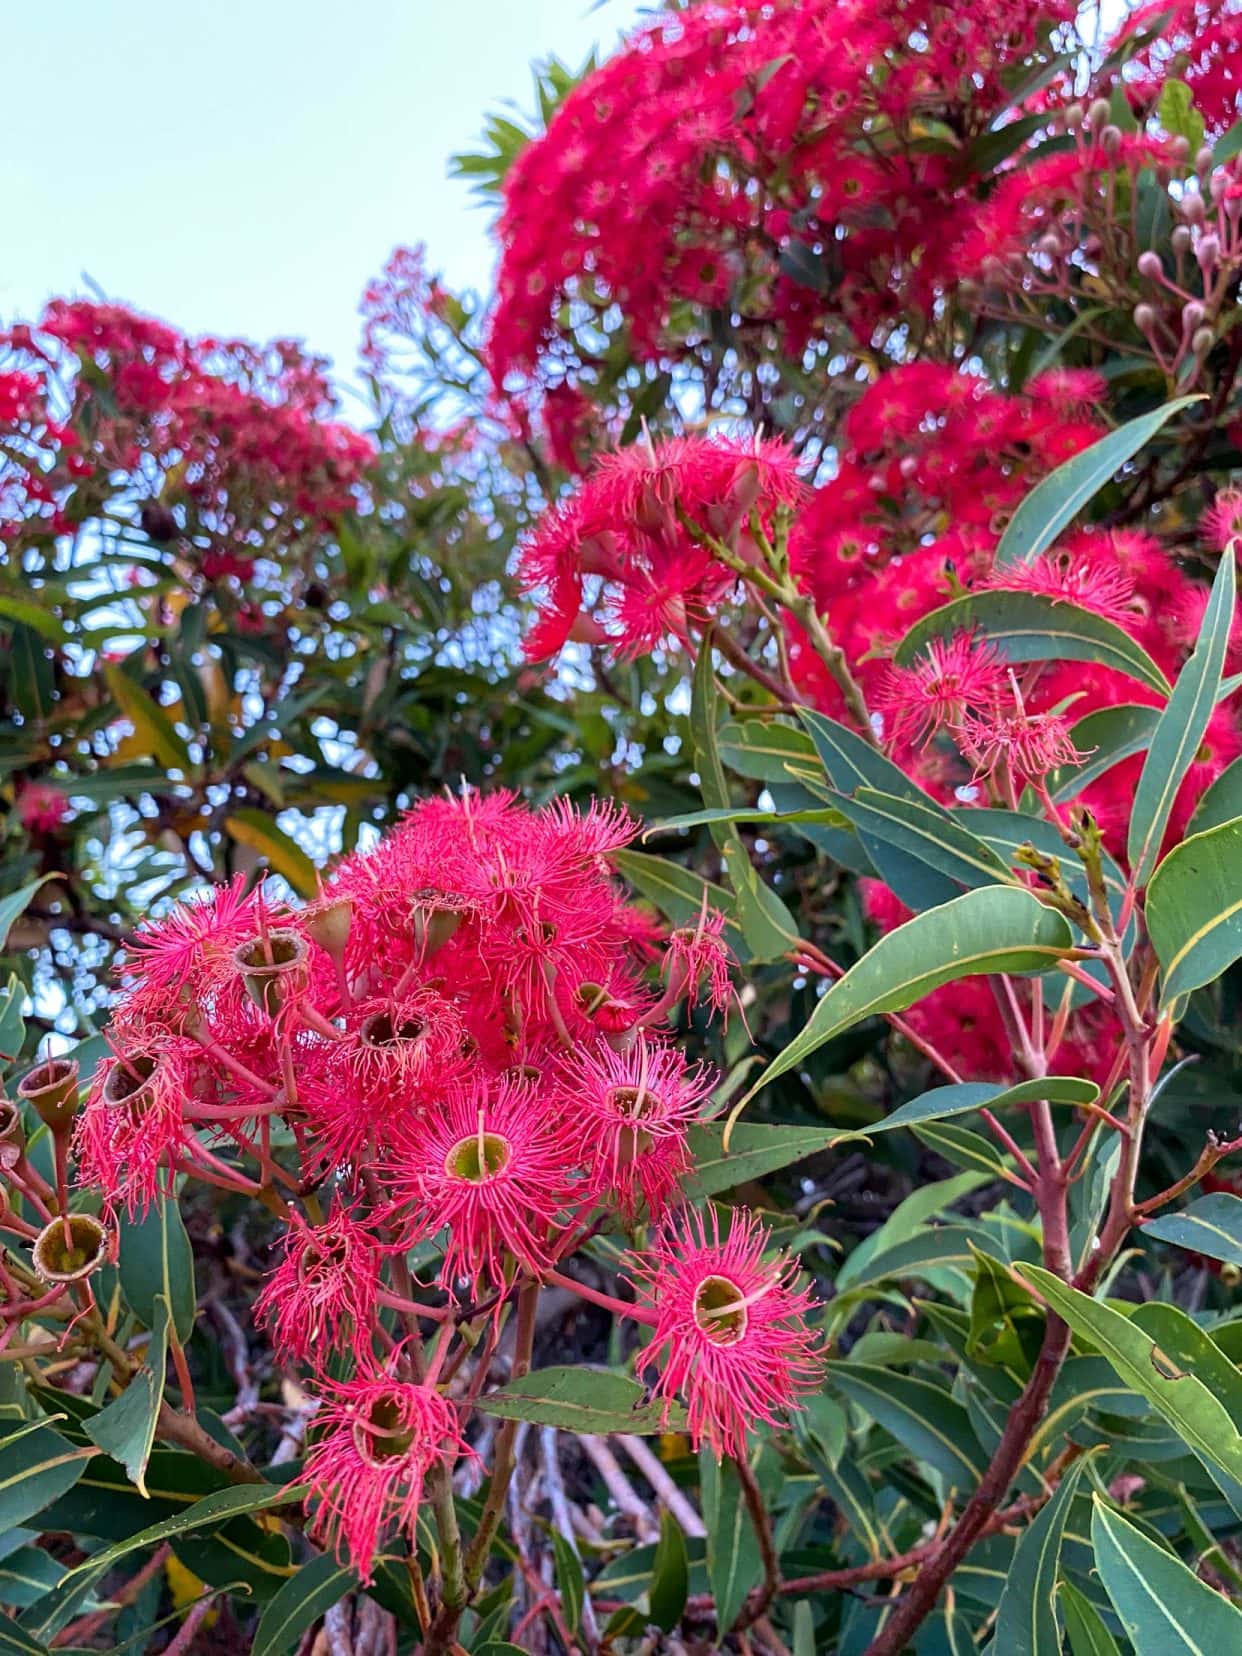 Red flowering gum tree with lots of red spiky flowers